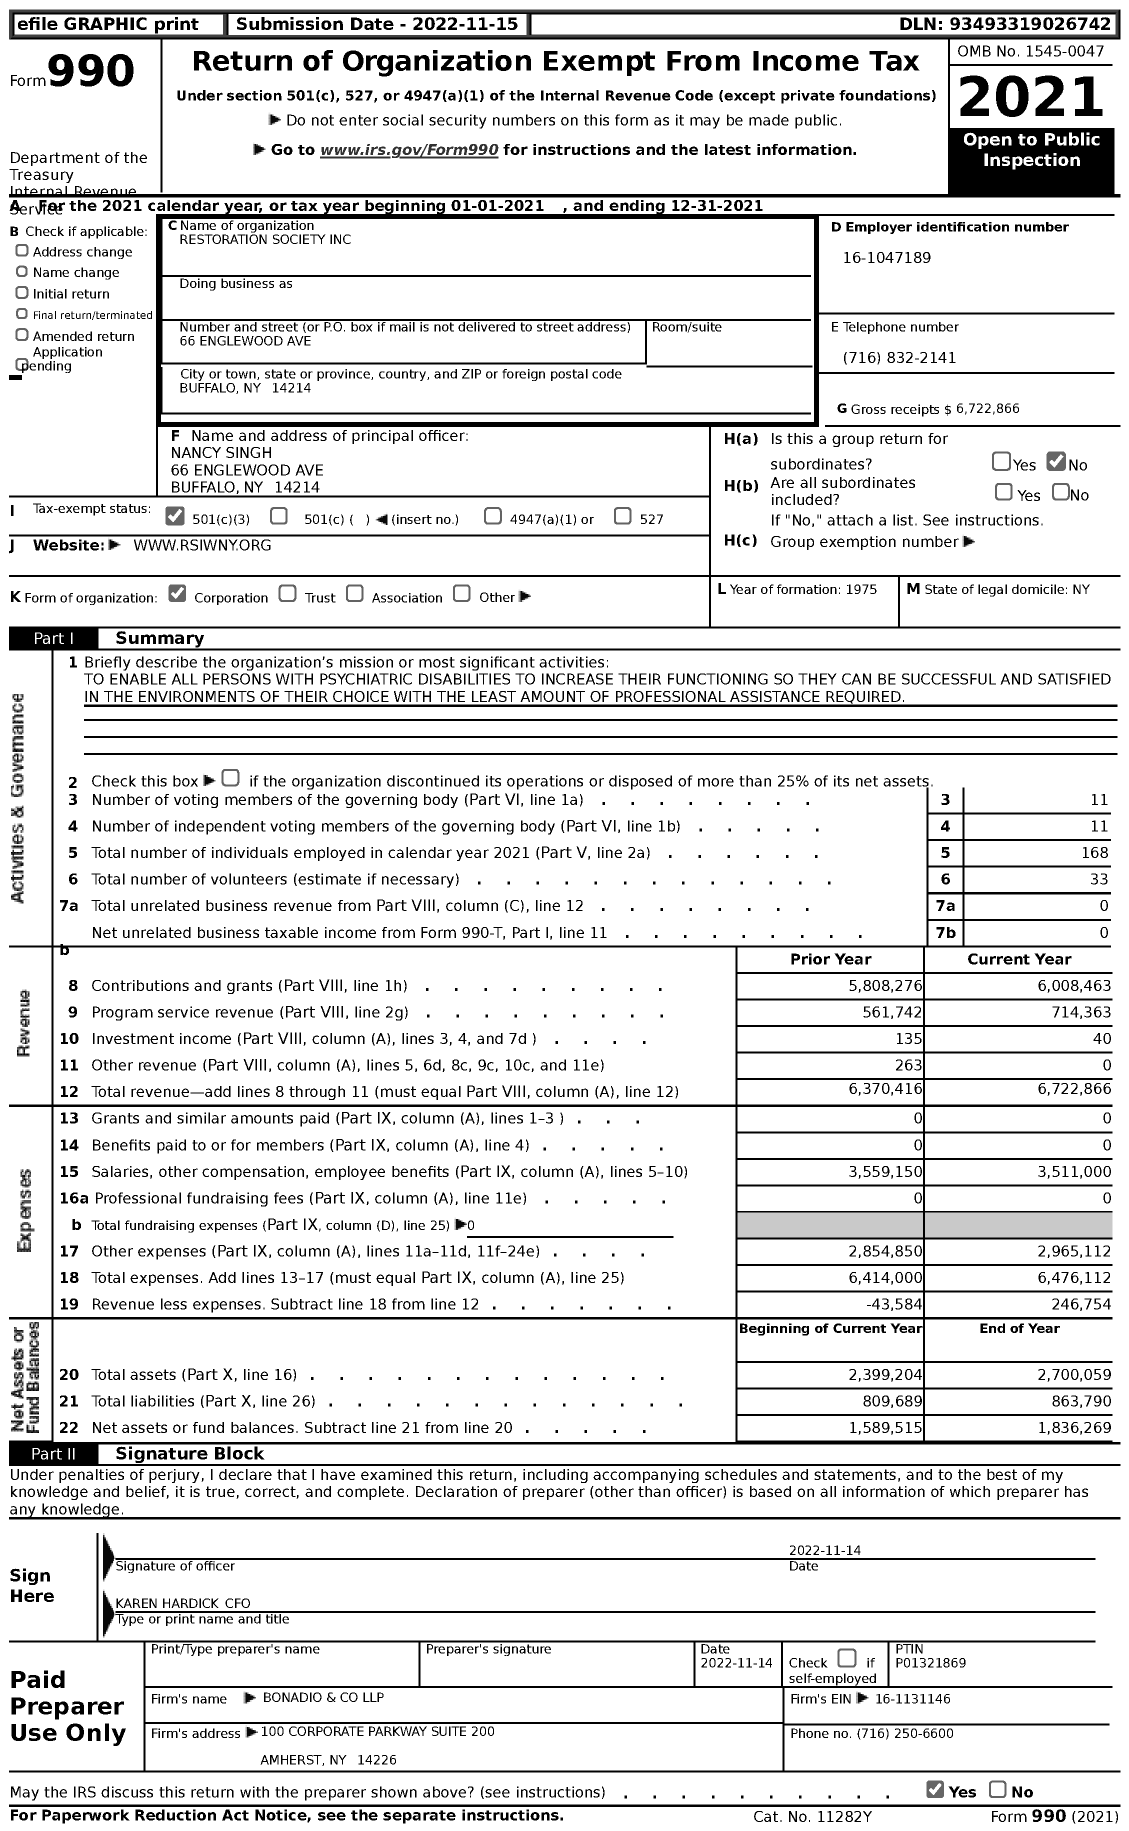 Image of first page of 2021 Form 990 for Restoration Society Incorporated (RSI)